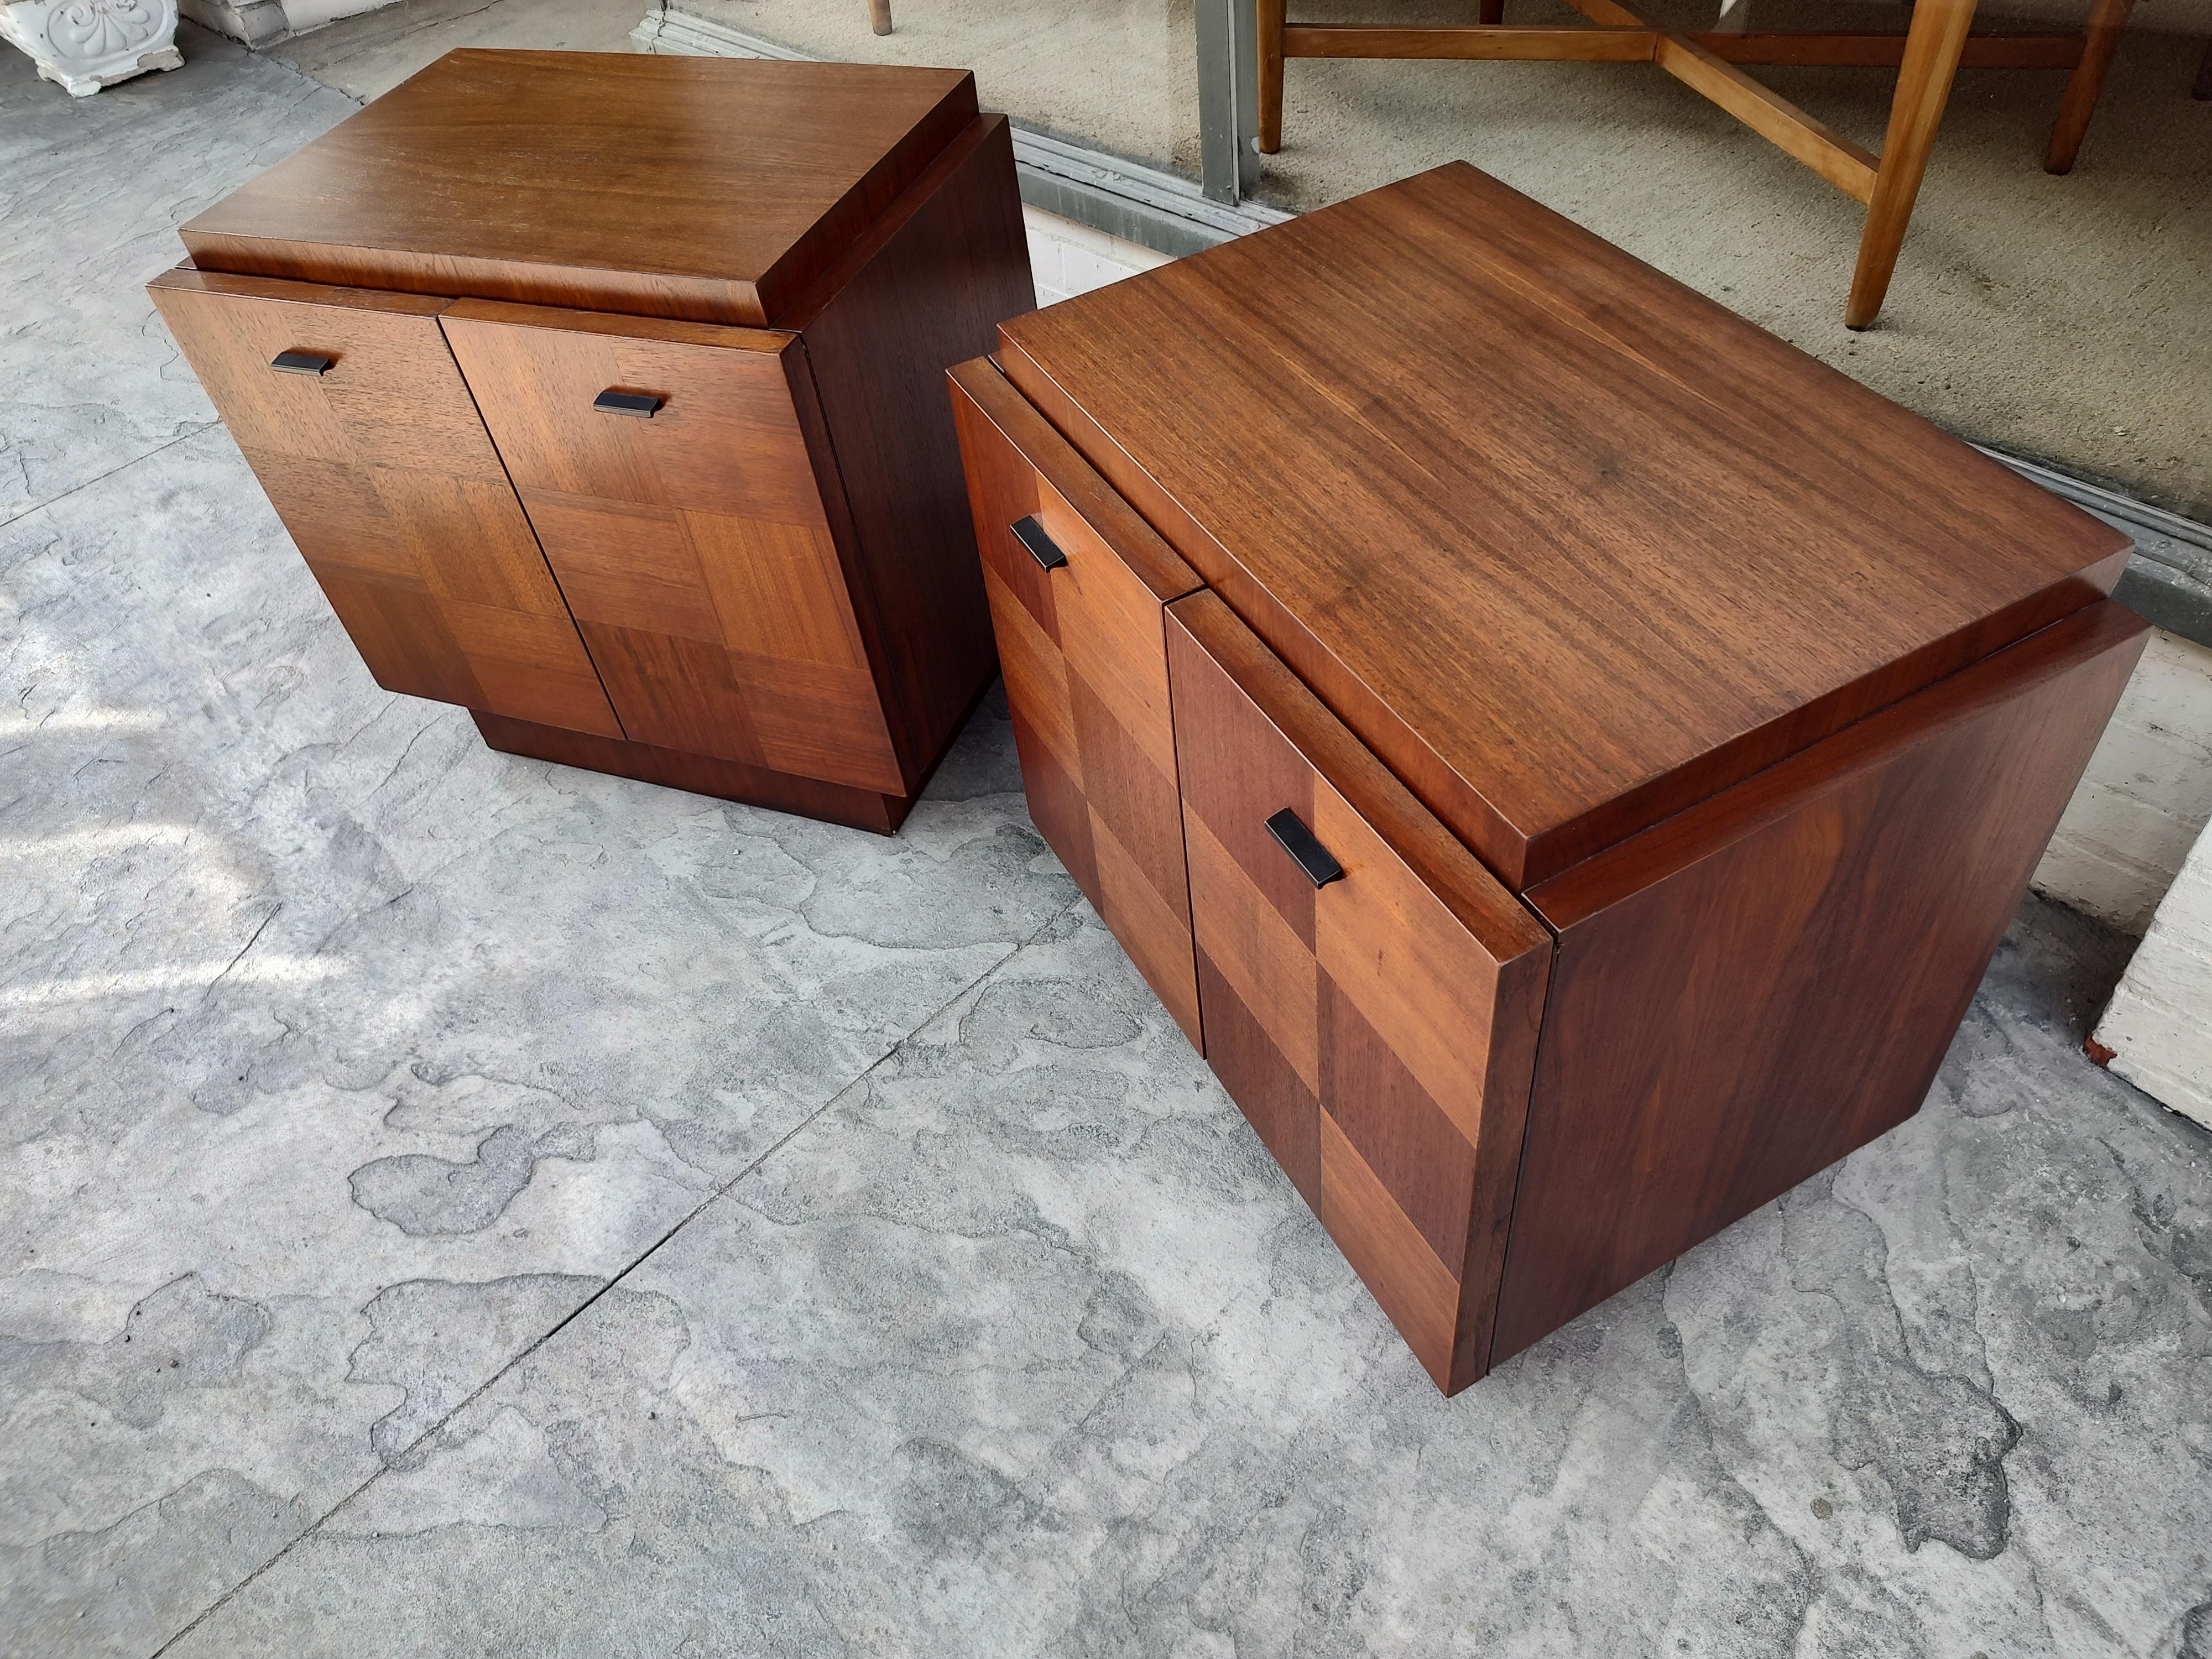 Fabulous pair of night tables by Lane, Staccato series. Brutalist styling, walnut squares cross stacked like a chess board across the double doors. Cabinet sits atop a plinth base. Black pulls contrasting. One Shelf inside for storage. Cabinets have